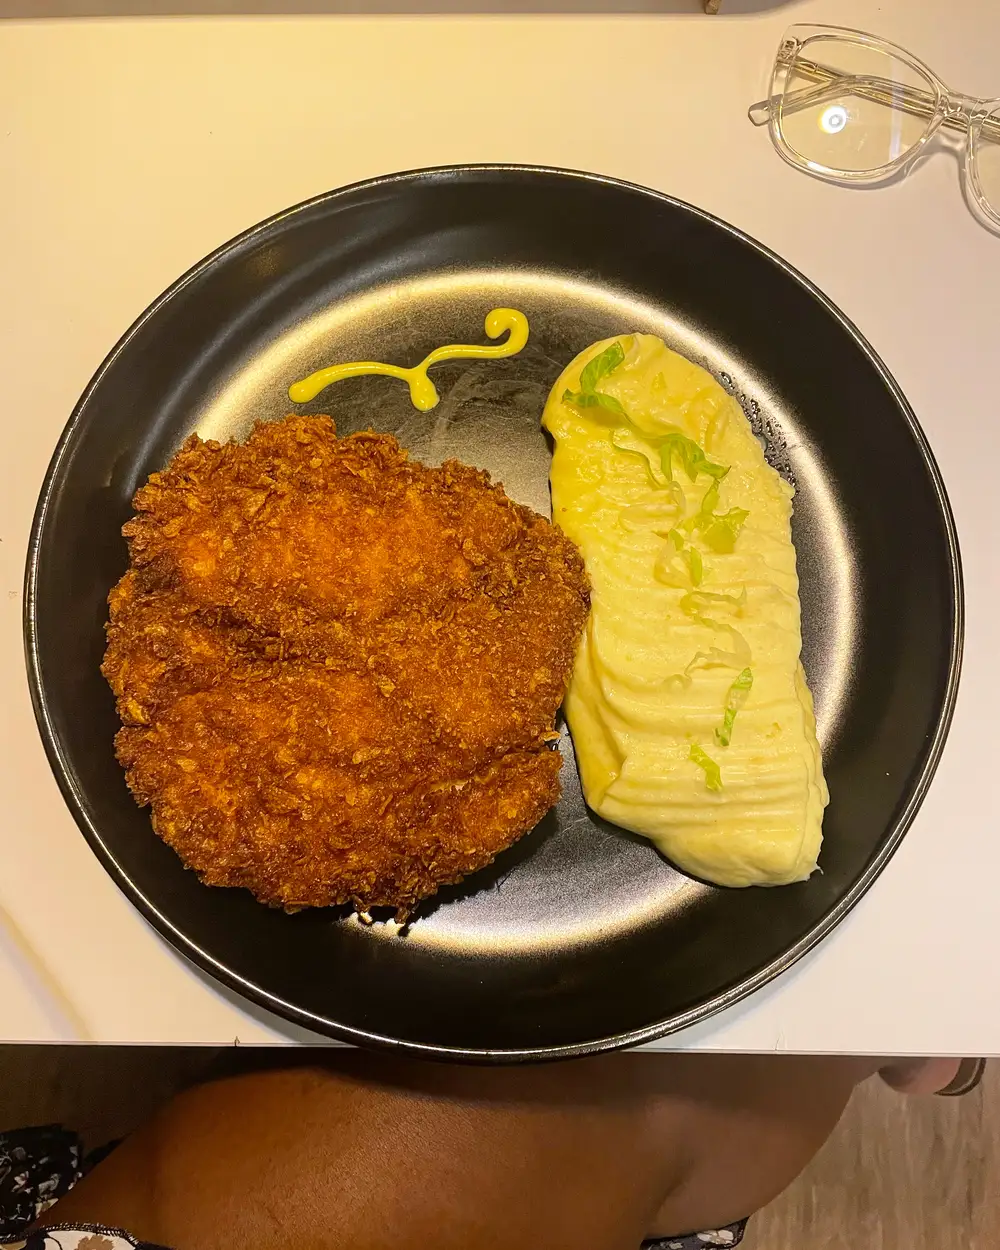 Schnitzel Chicken and mashed potatoes